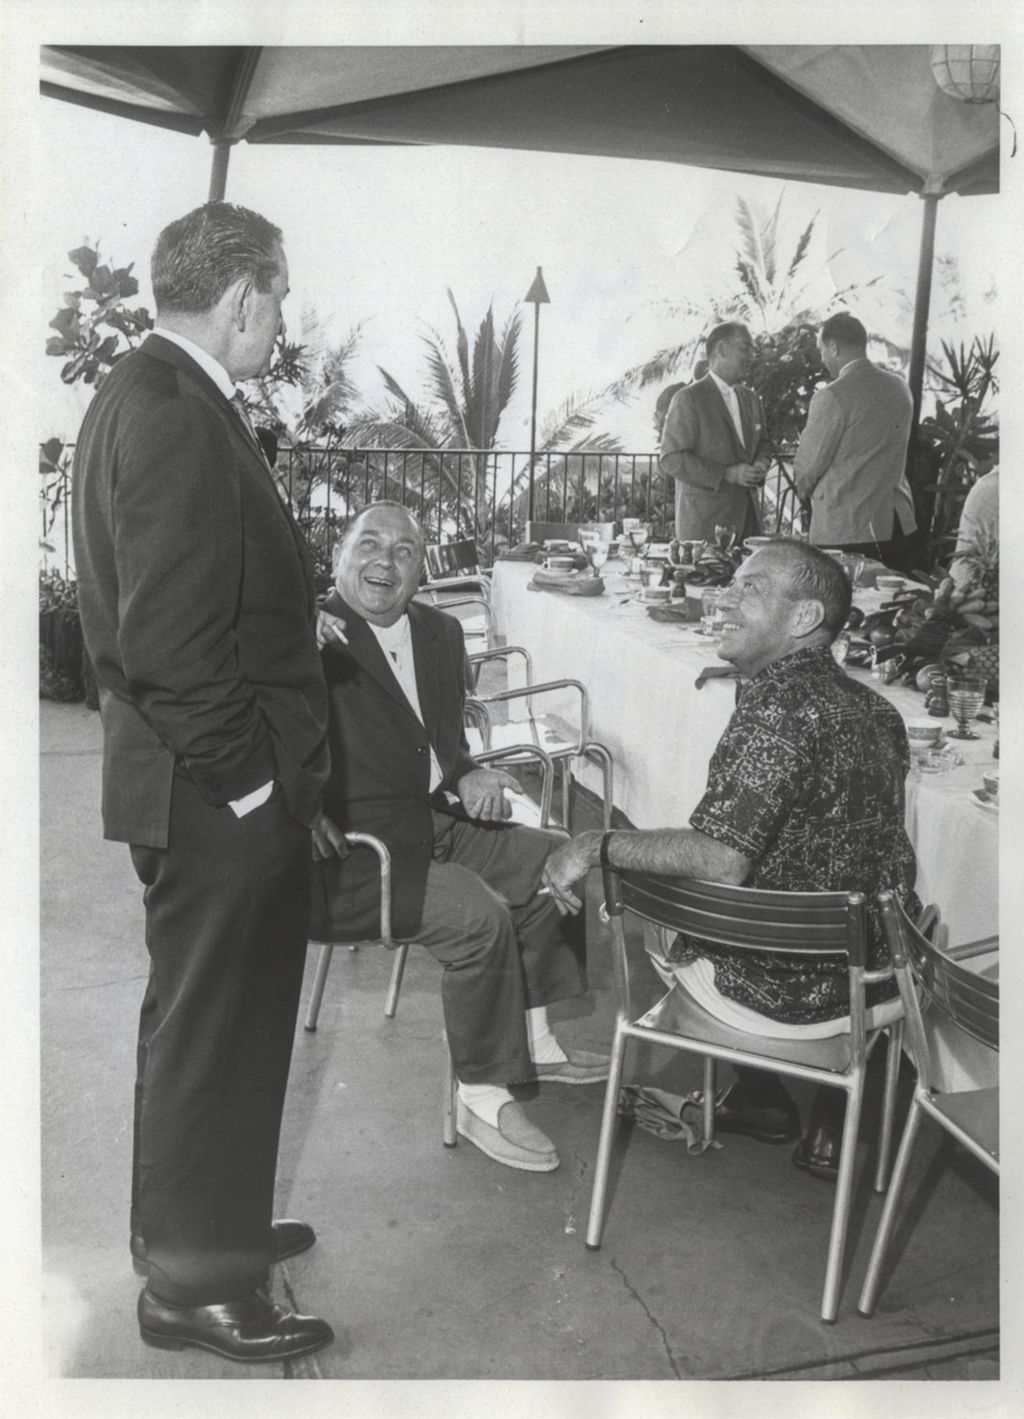 Richard J. Daley and Robert F. Wagner at Mayors convention in Hawaii